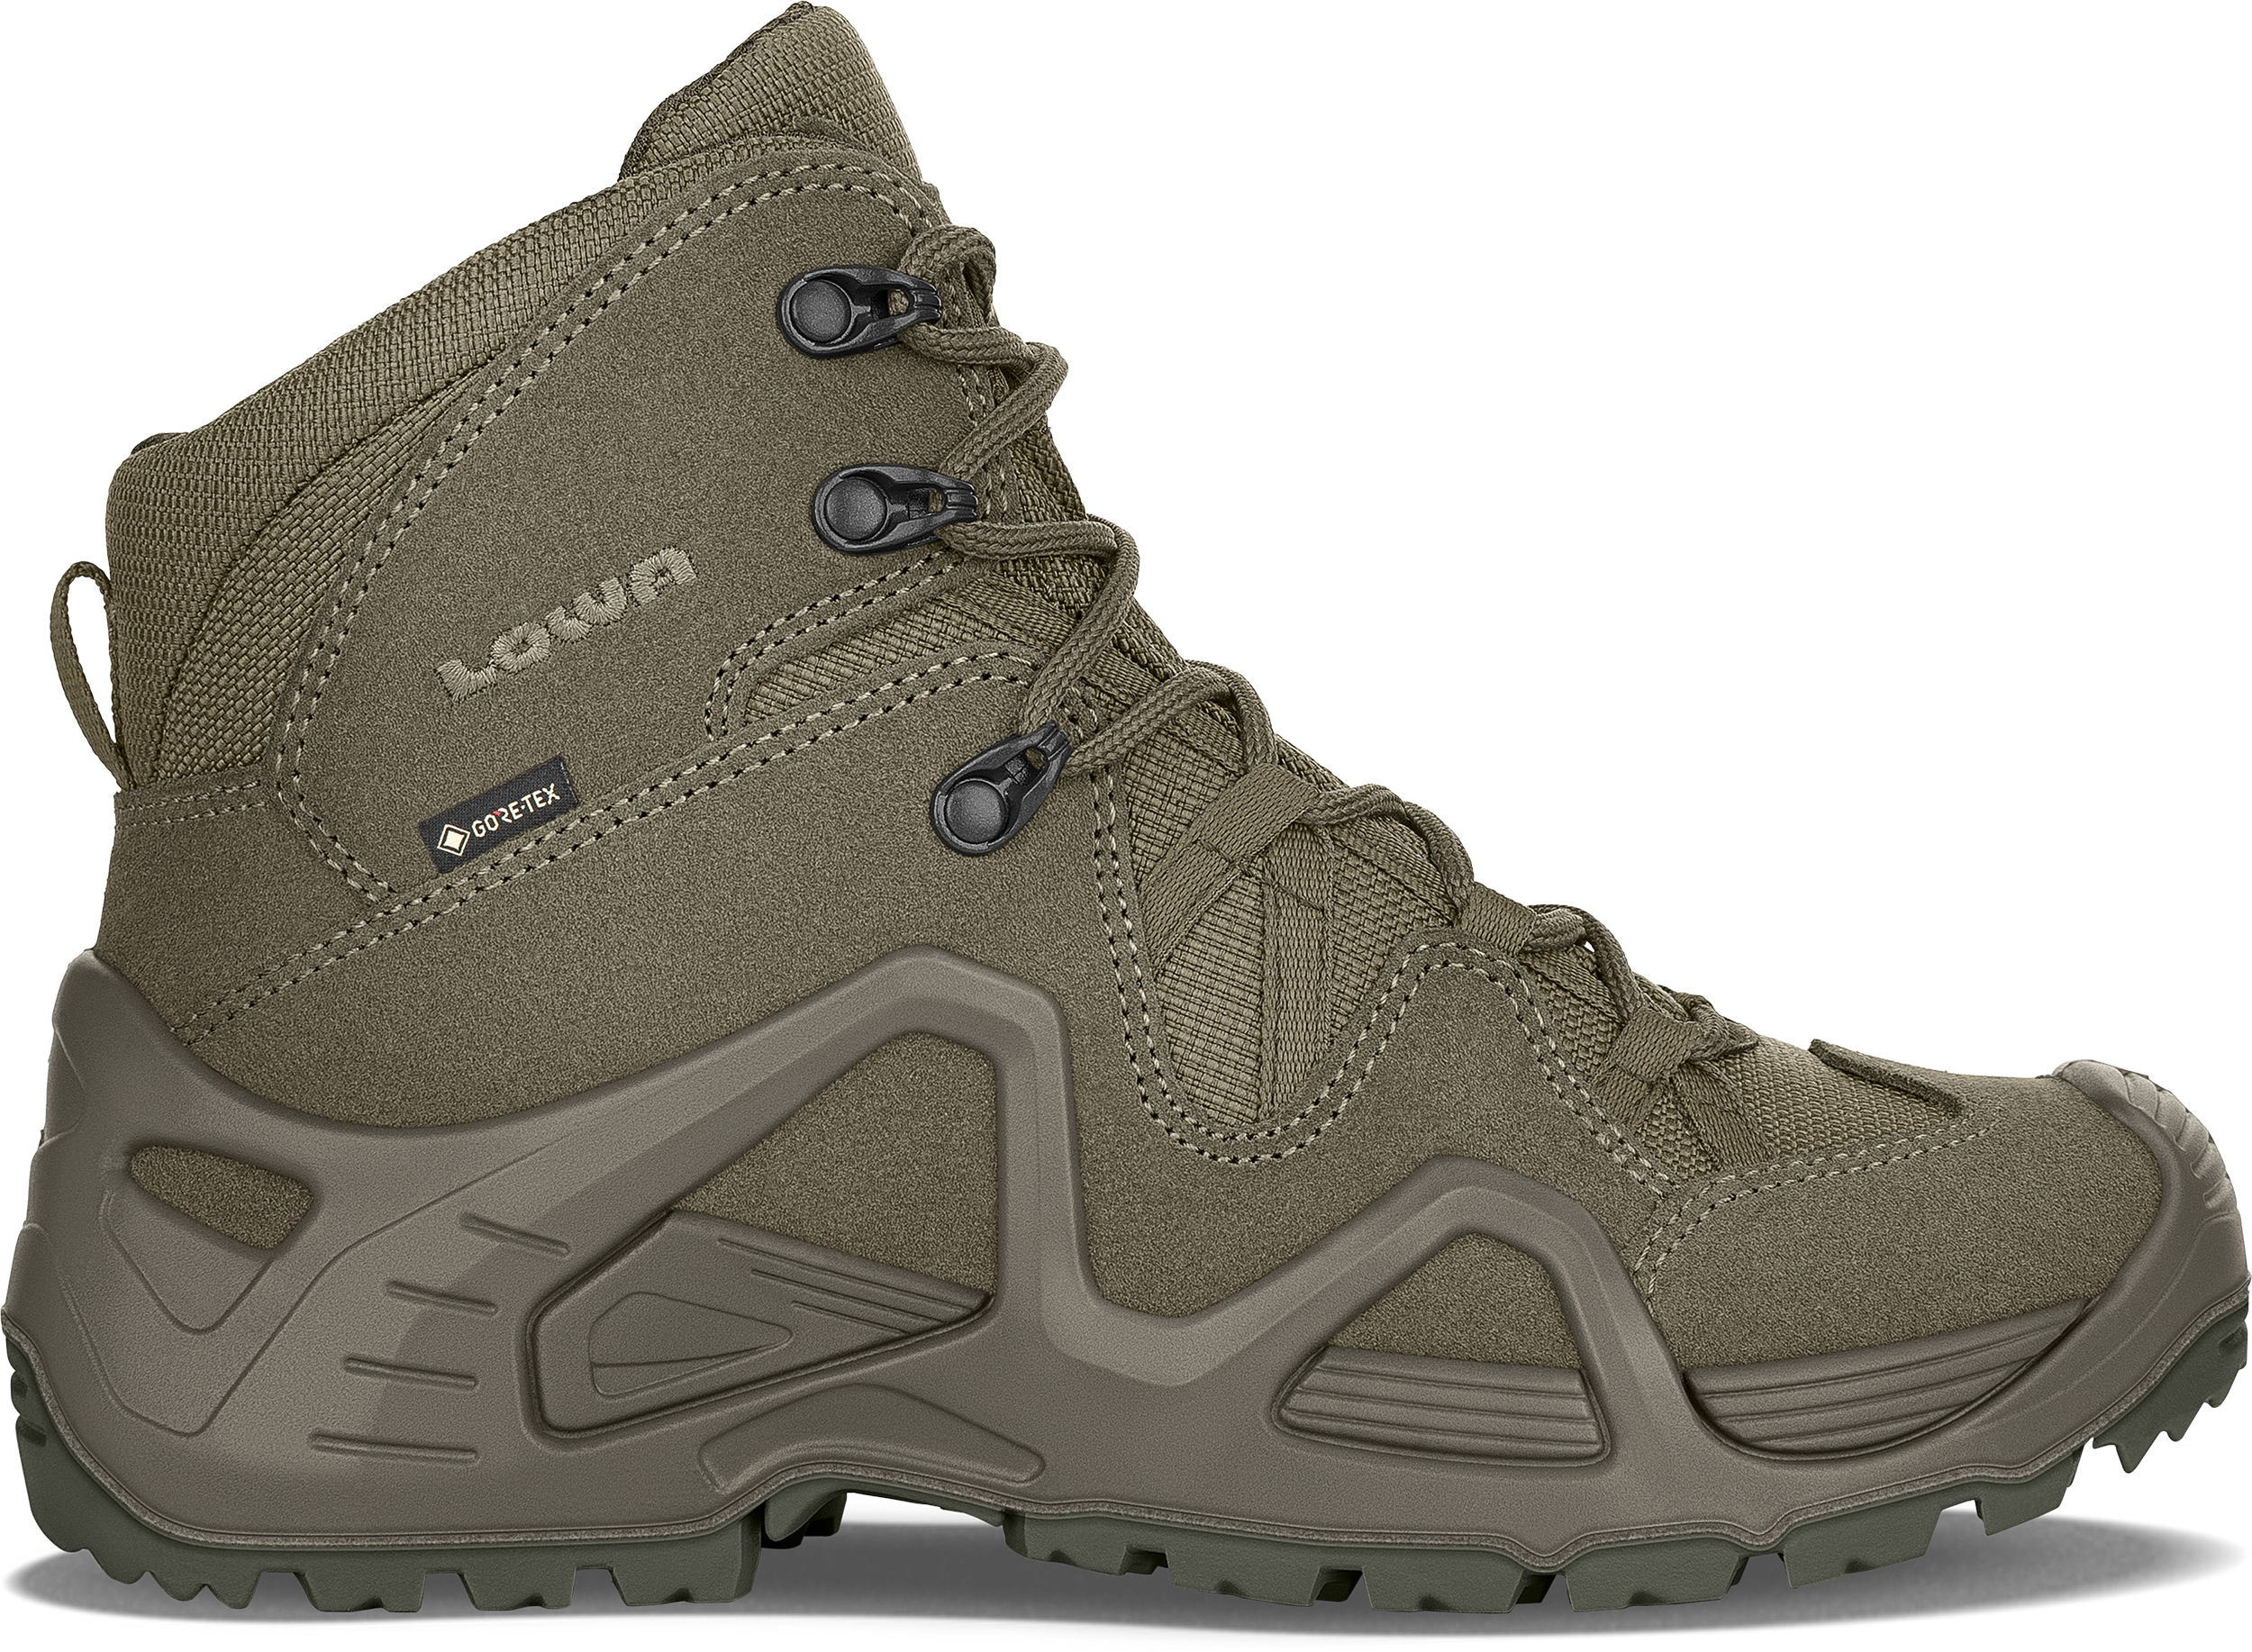 ZEPHYR GTX MID TF Ws: TASK FORCE: CLOSE-QUARTERS COMBAT Shoes for 